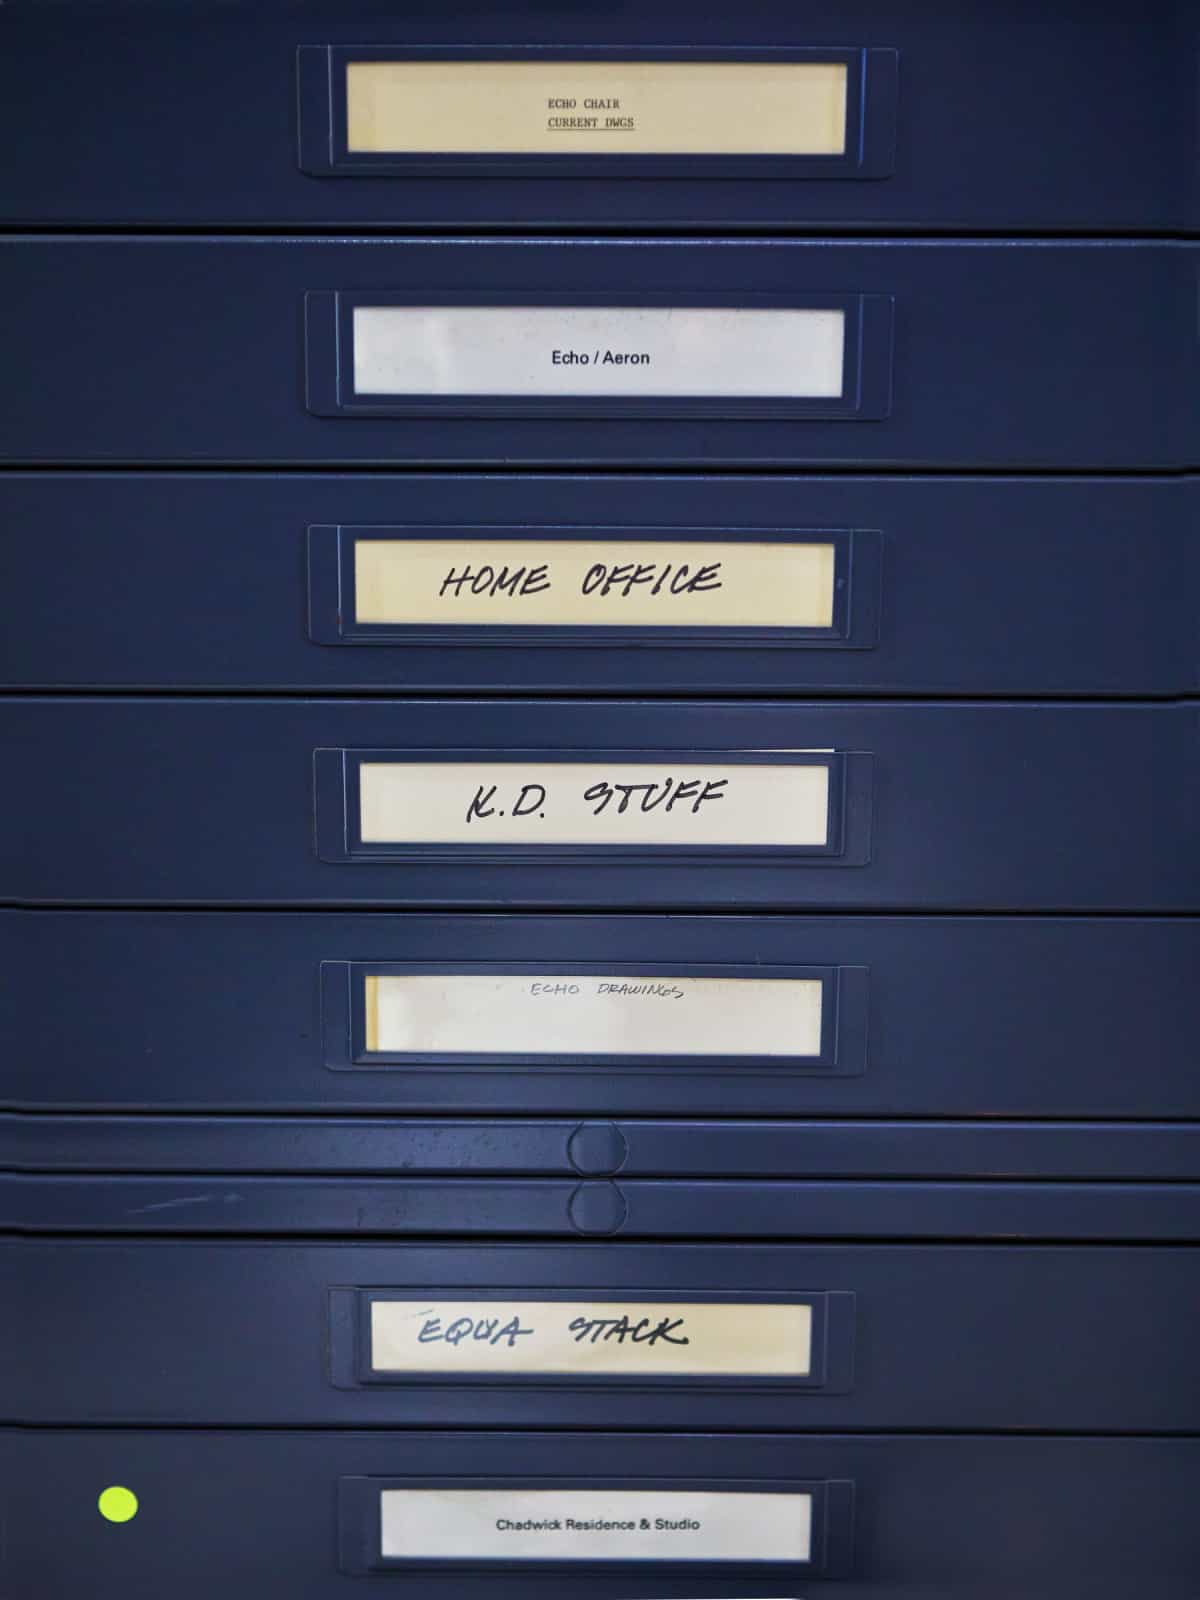 A file cabinet with many of Don Chadwick's past projects, including Aeron and Equa Chairs.